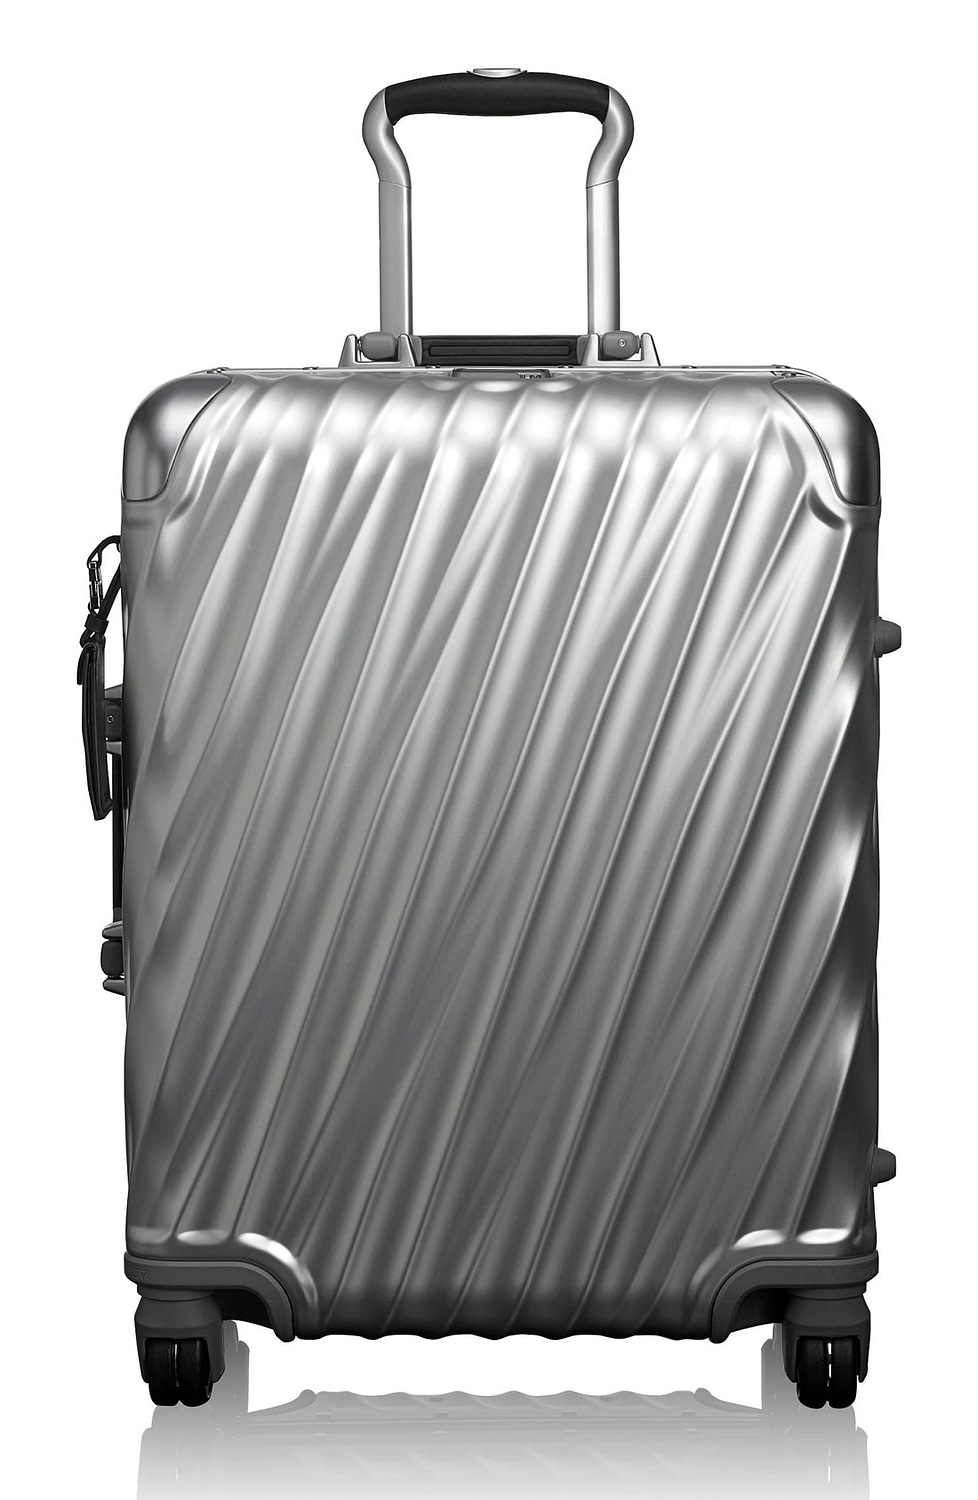 11 Aluminum Suitcases You’ll Want to Use Forever